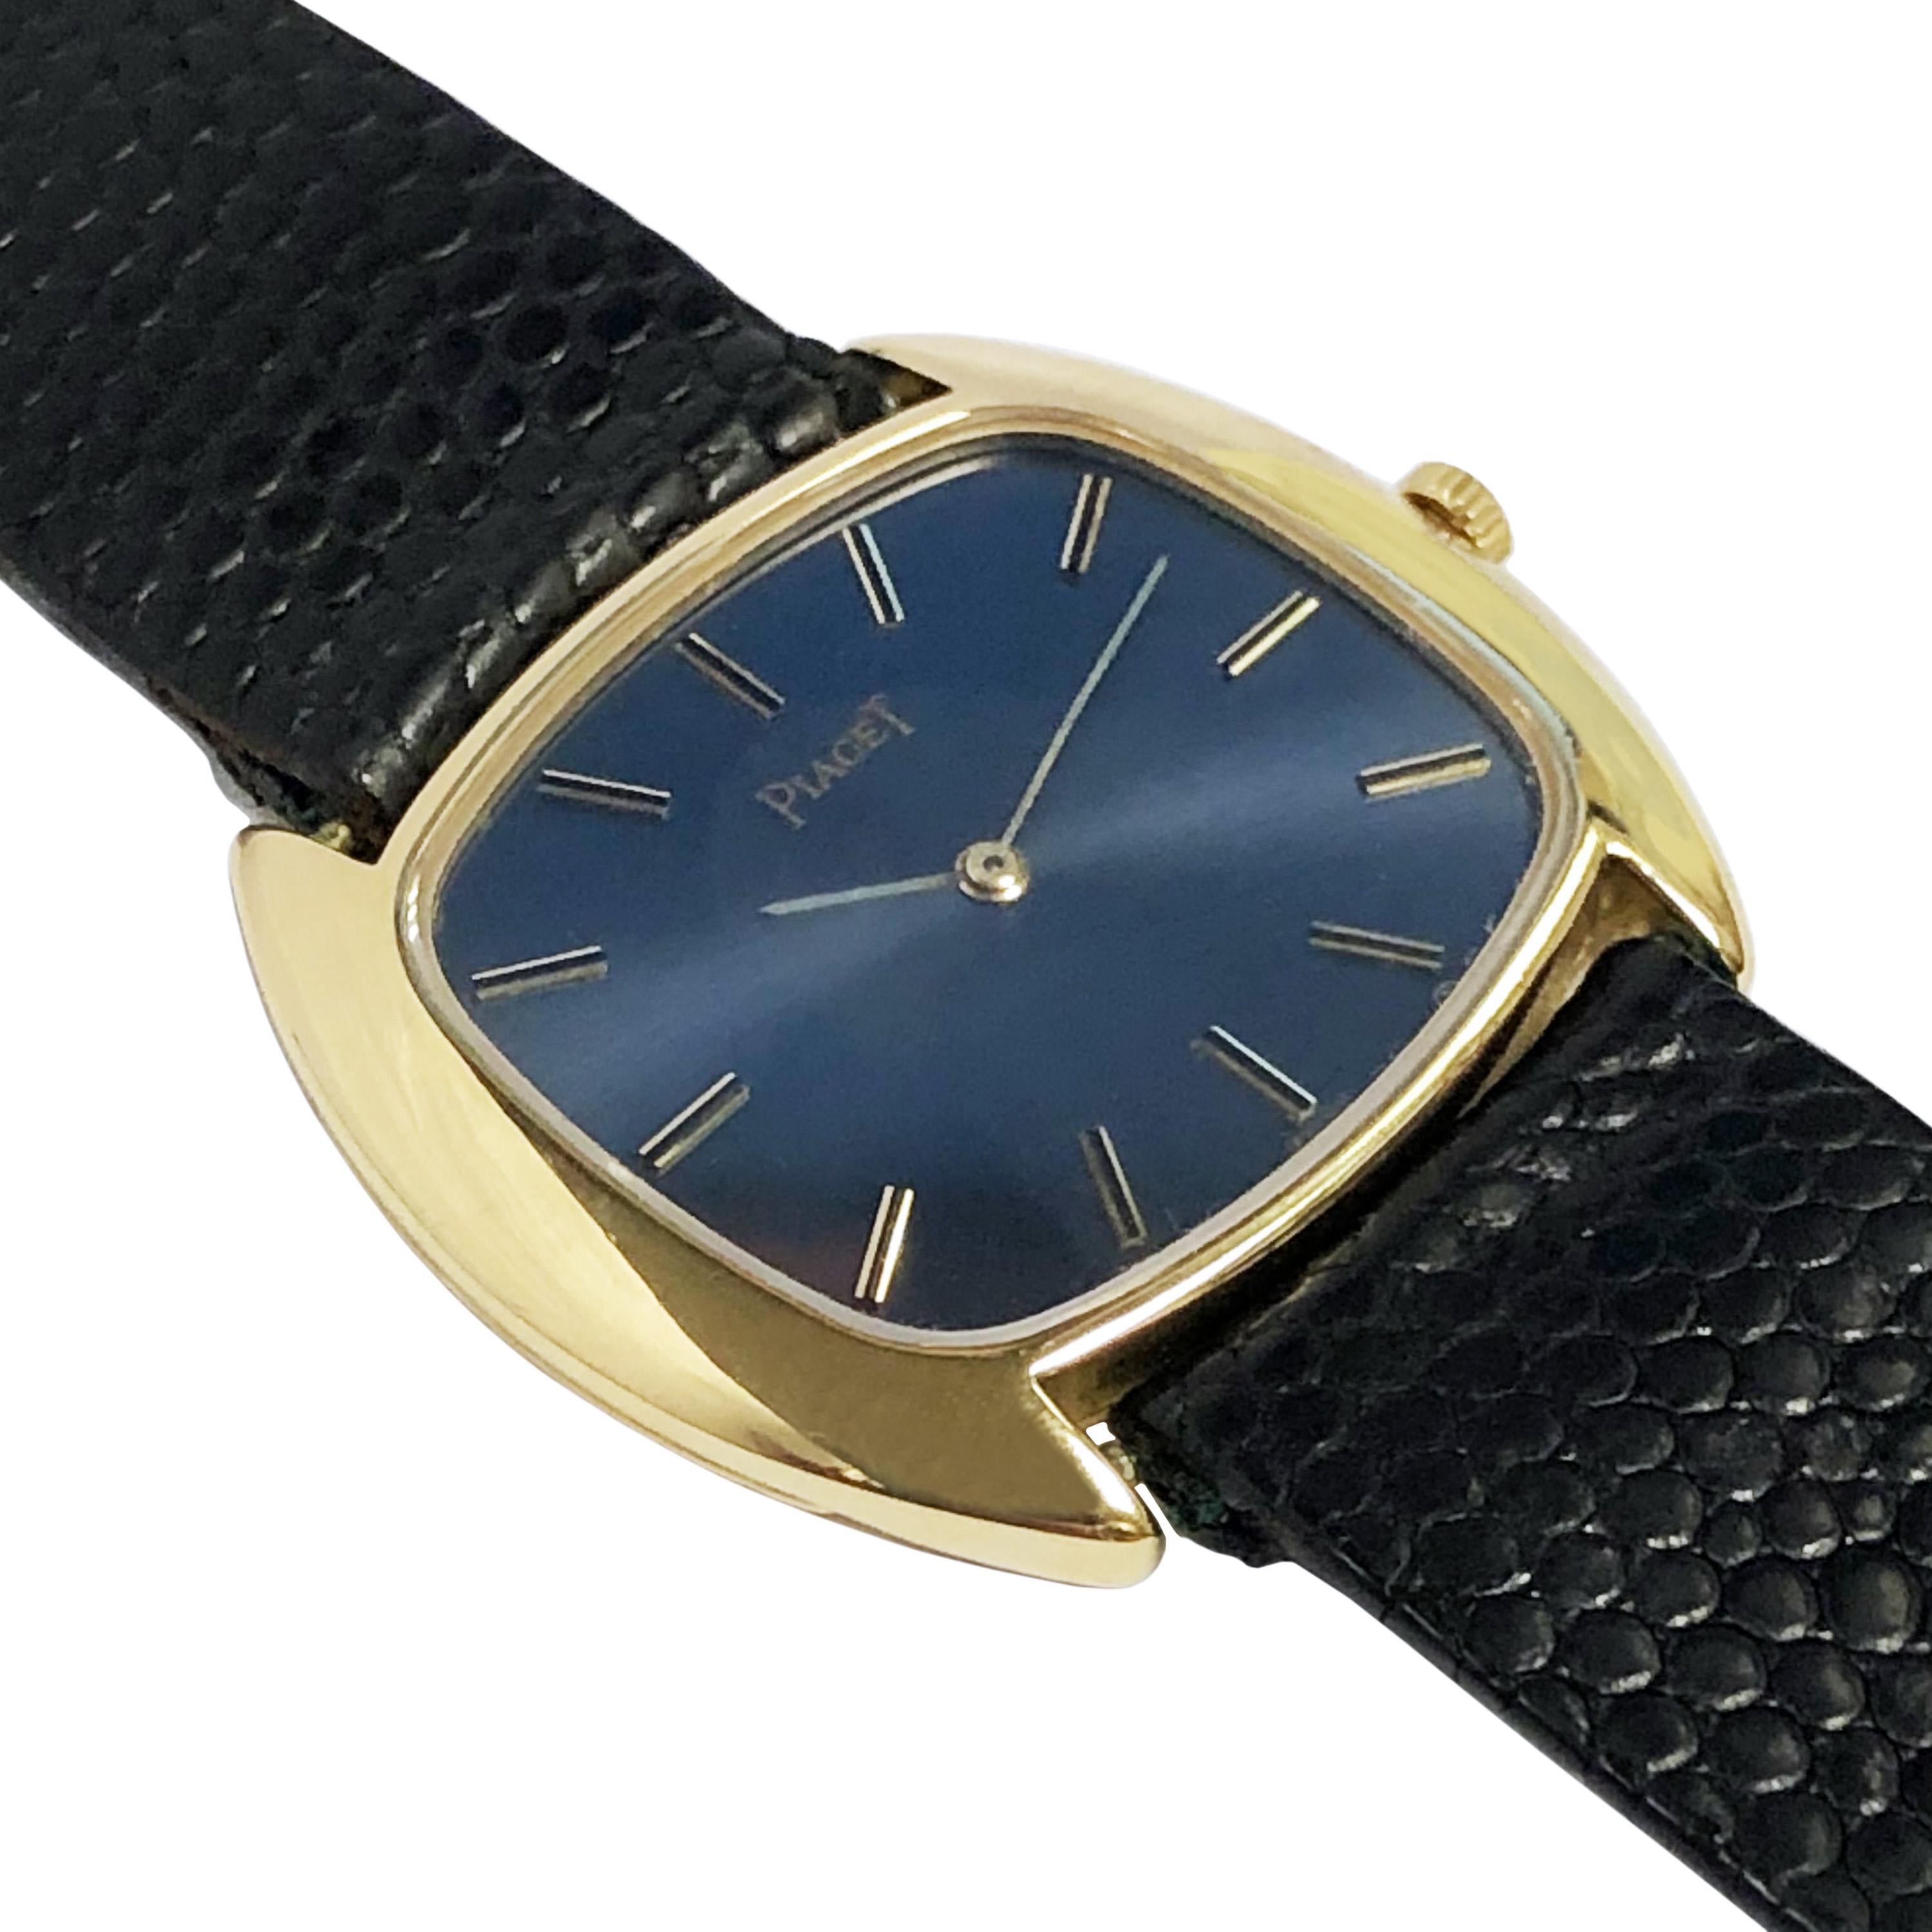 Circa 1970s Piaget Wrist Watch,  31 X 27 MM Cushion shape 18k Yellow Gold 2 piece case. 17 jewel mechanical, Manual wind movement, Navy Blue Satin dial with raised Gold markers. New Black Lizard strap with original Piaget 18k Gold buckle. Recently